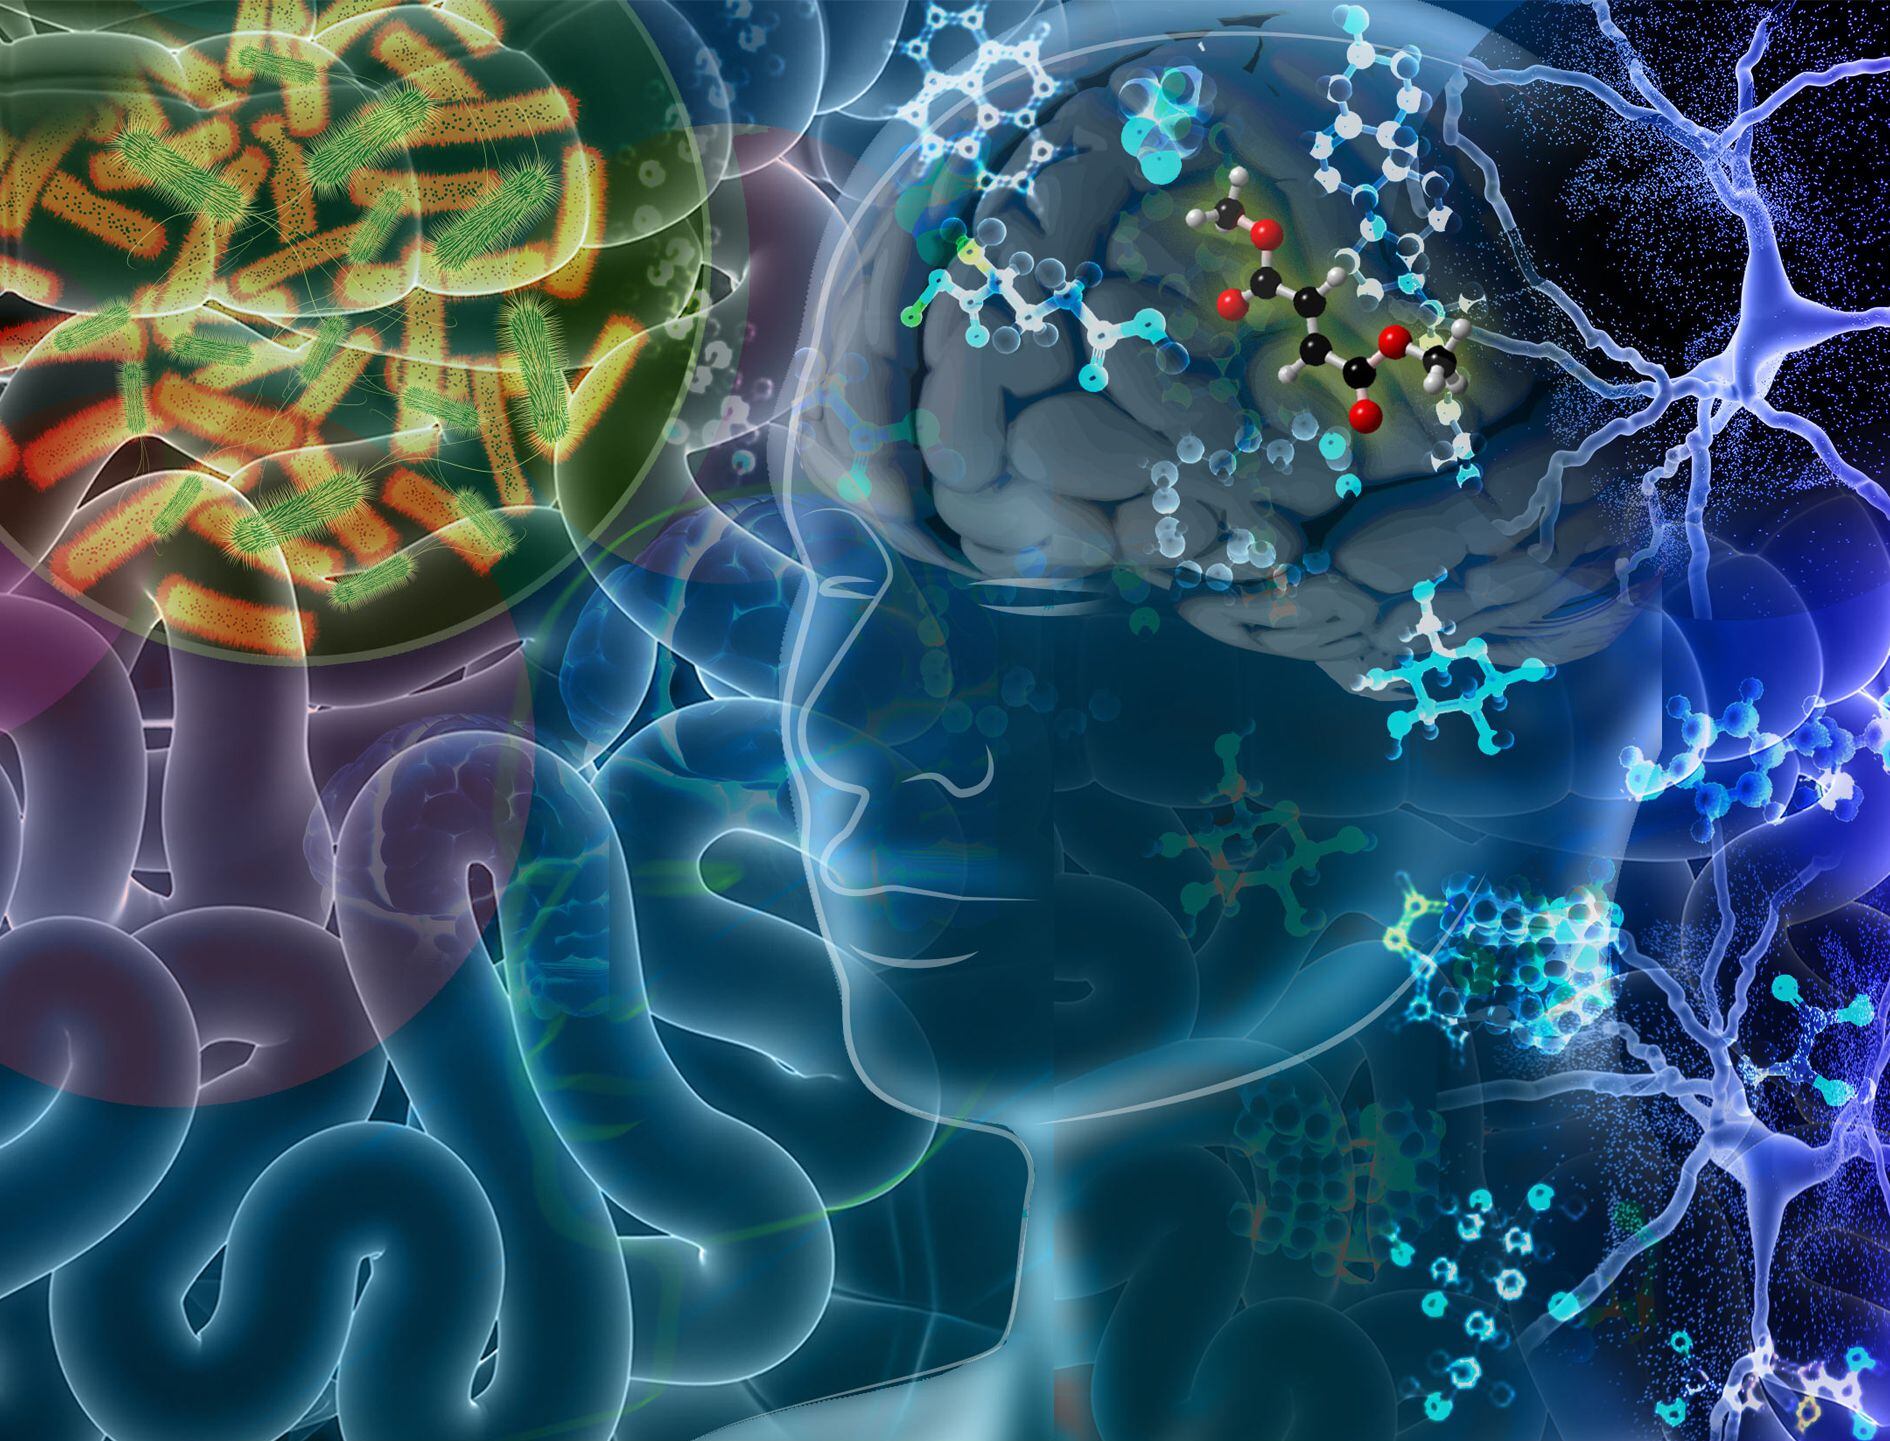 A new study has identified gut-derived metabolites that appear to be neurotoxic and play a role in the progression of multiple sclerosis.  CREDIT Nicoletta Barolini